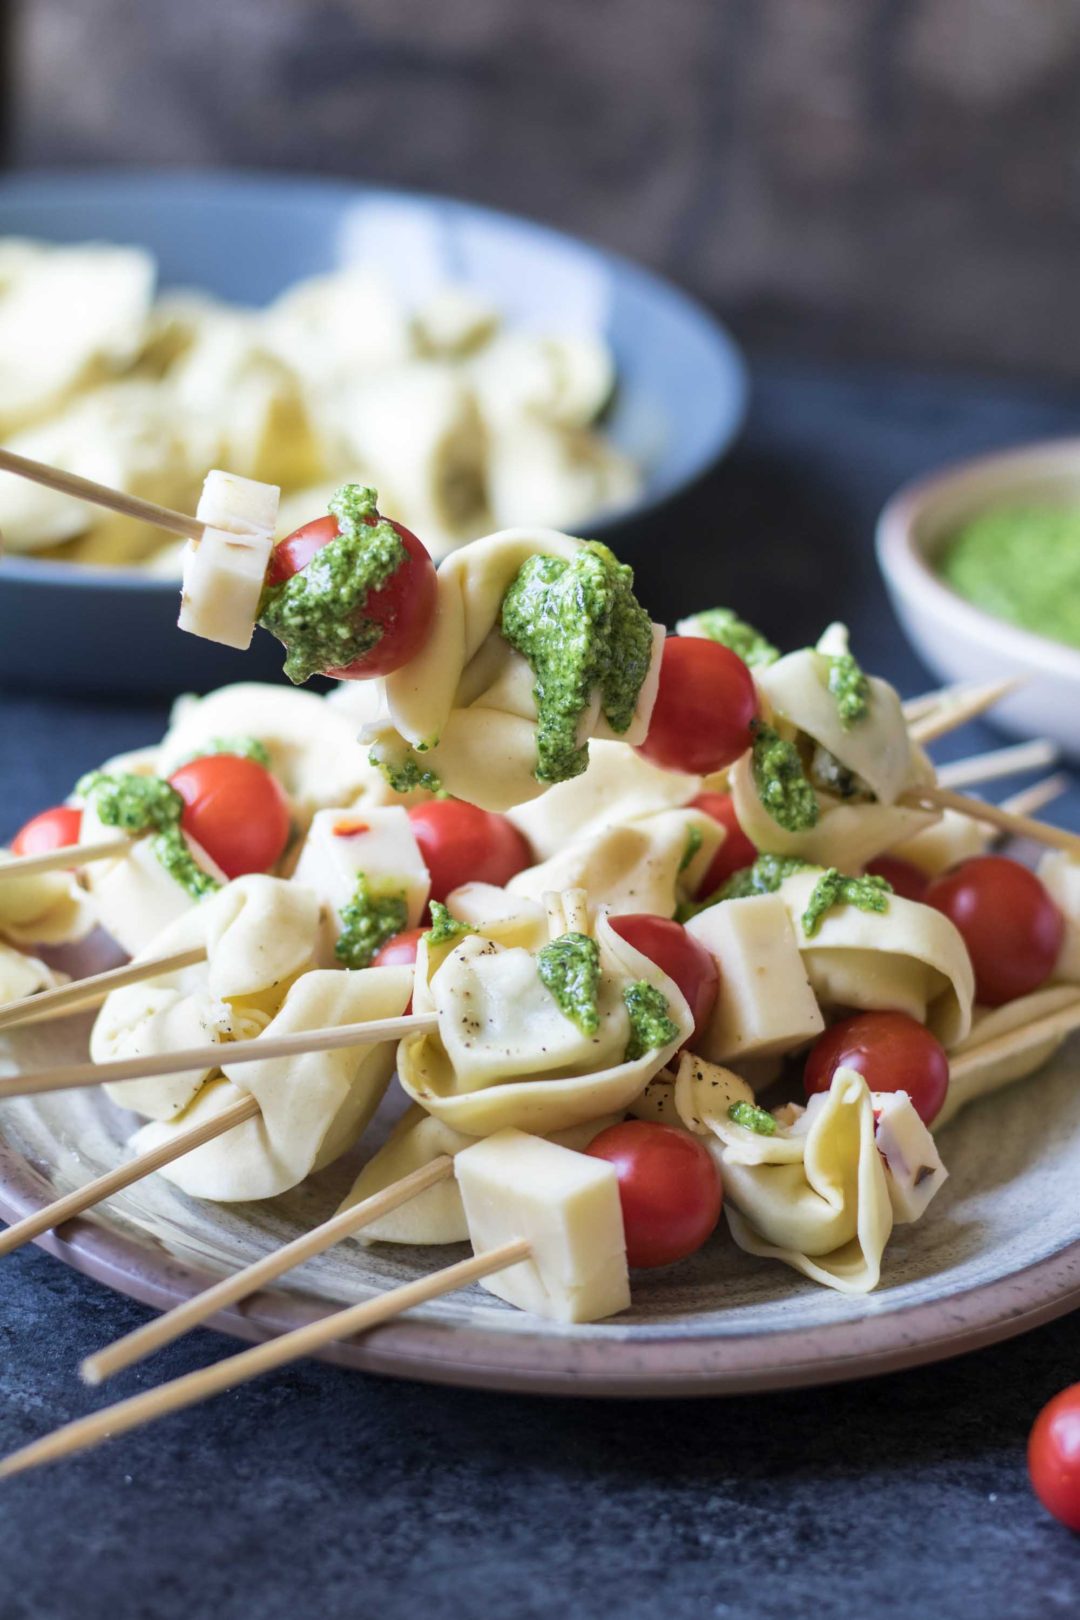 These tortellini skewers with lemon spinach pesto are a perfect light and satisfying appetizer! | Krollskorner.com